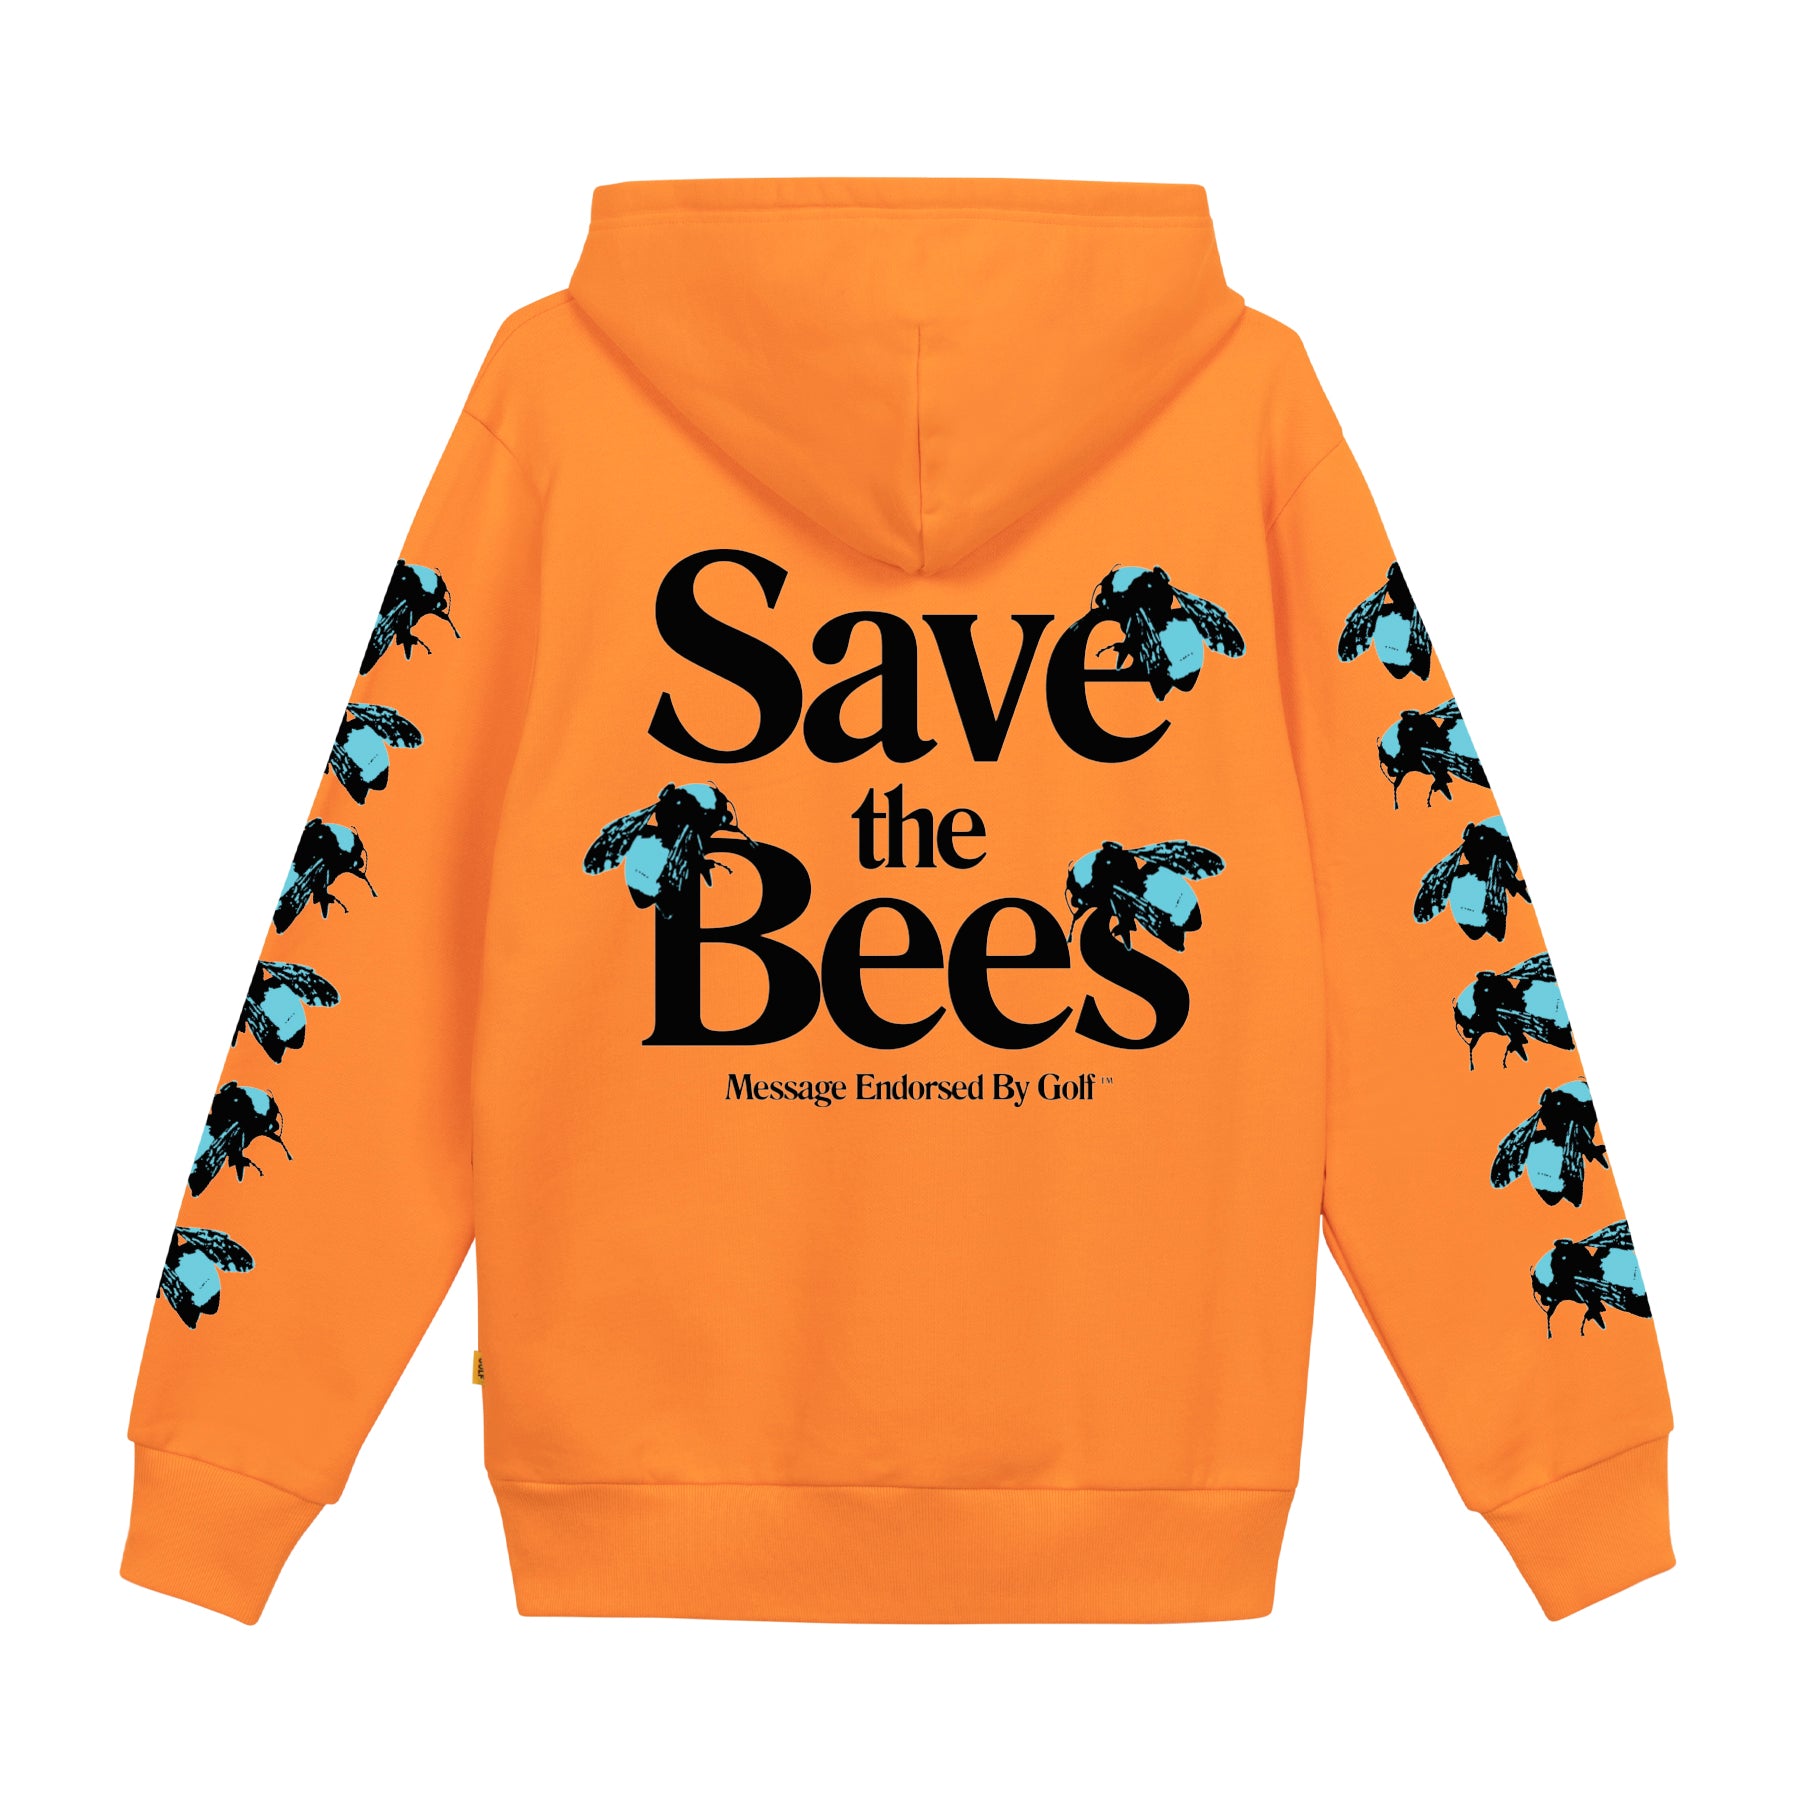 SAVE THE BEES HOODIE by GOLF WANG